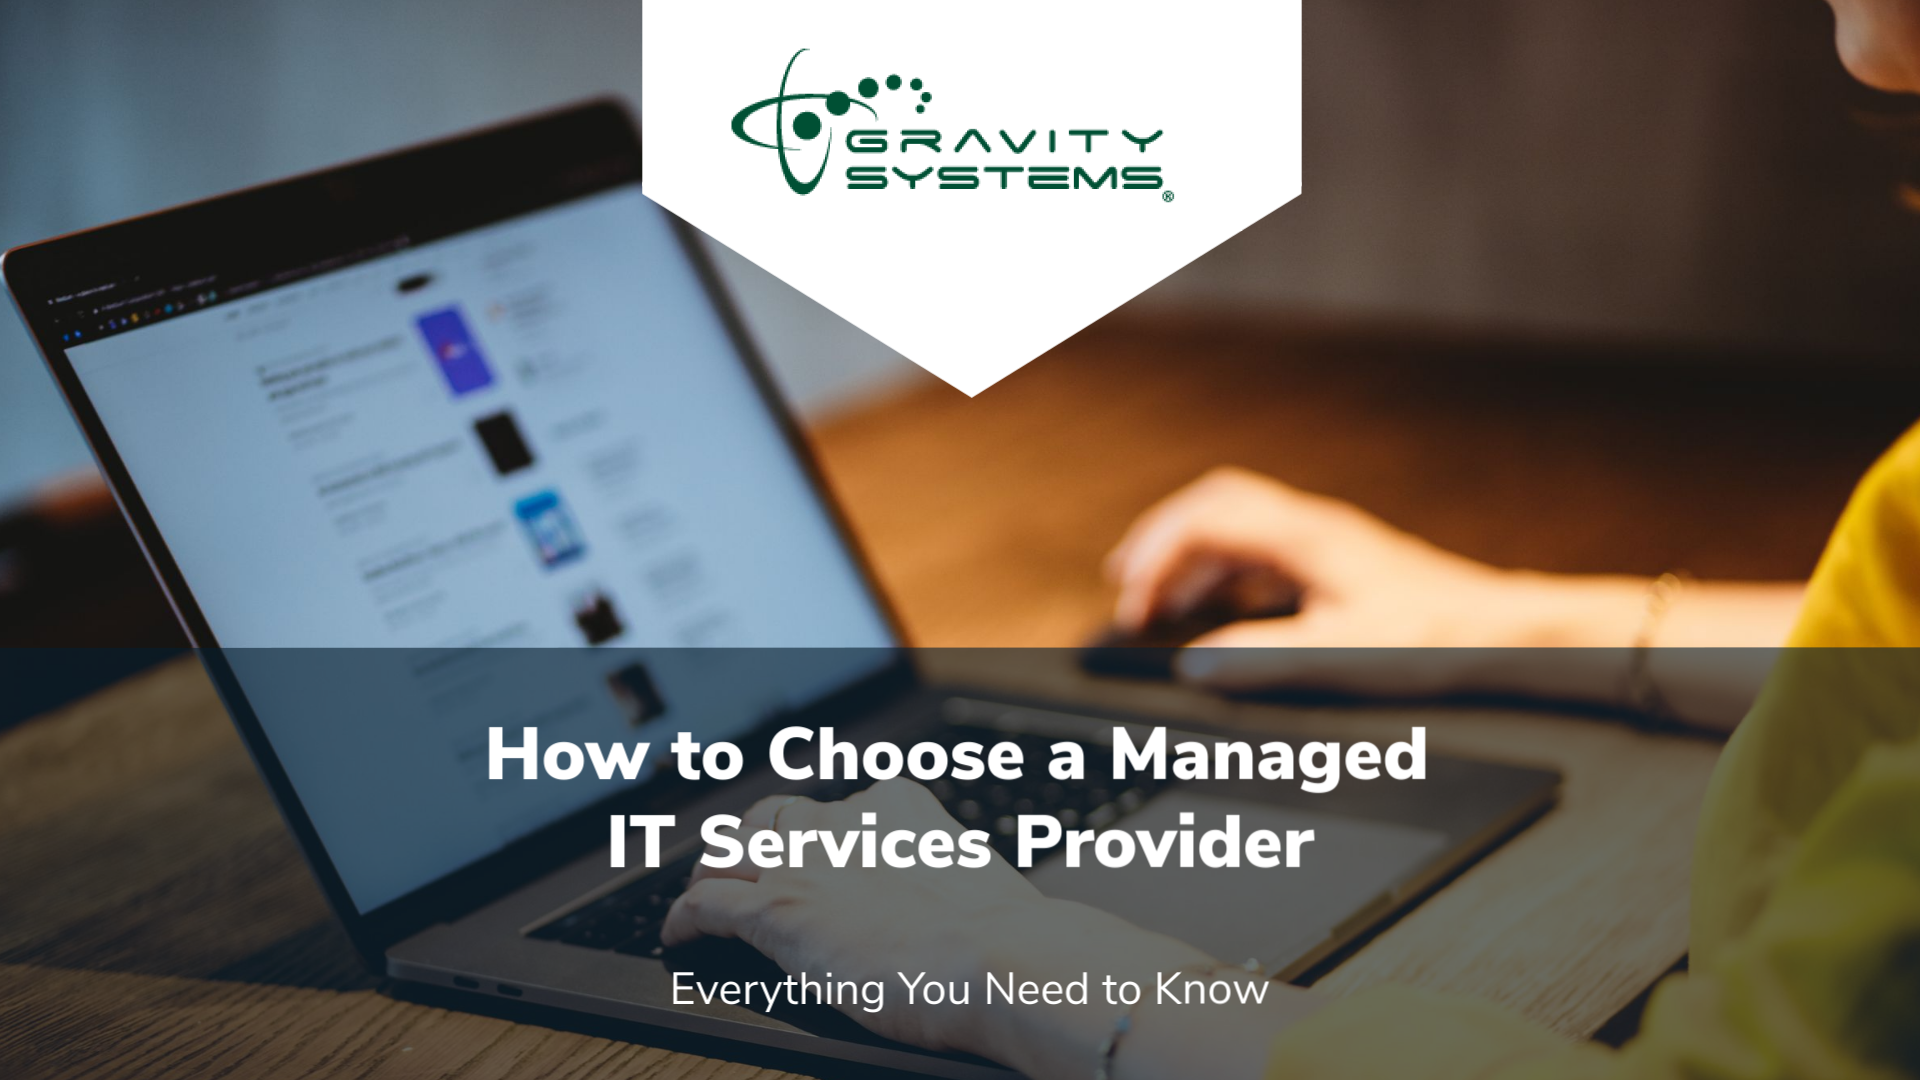 Choosing a Managed IT Services Provider